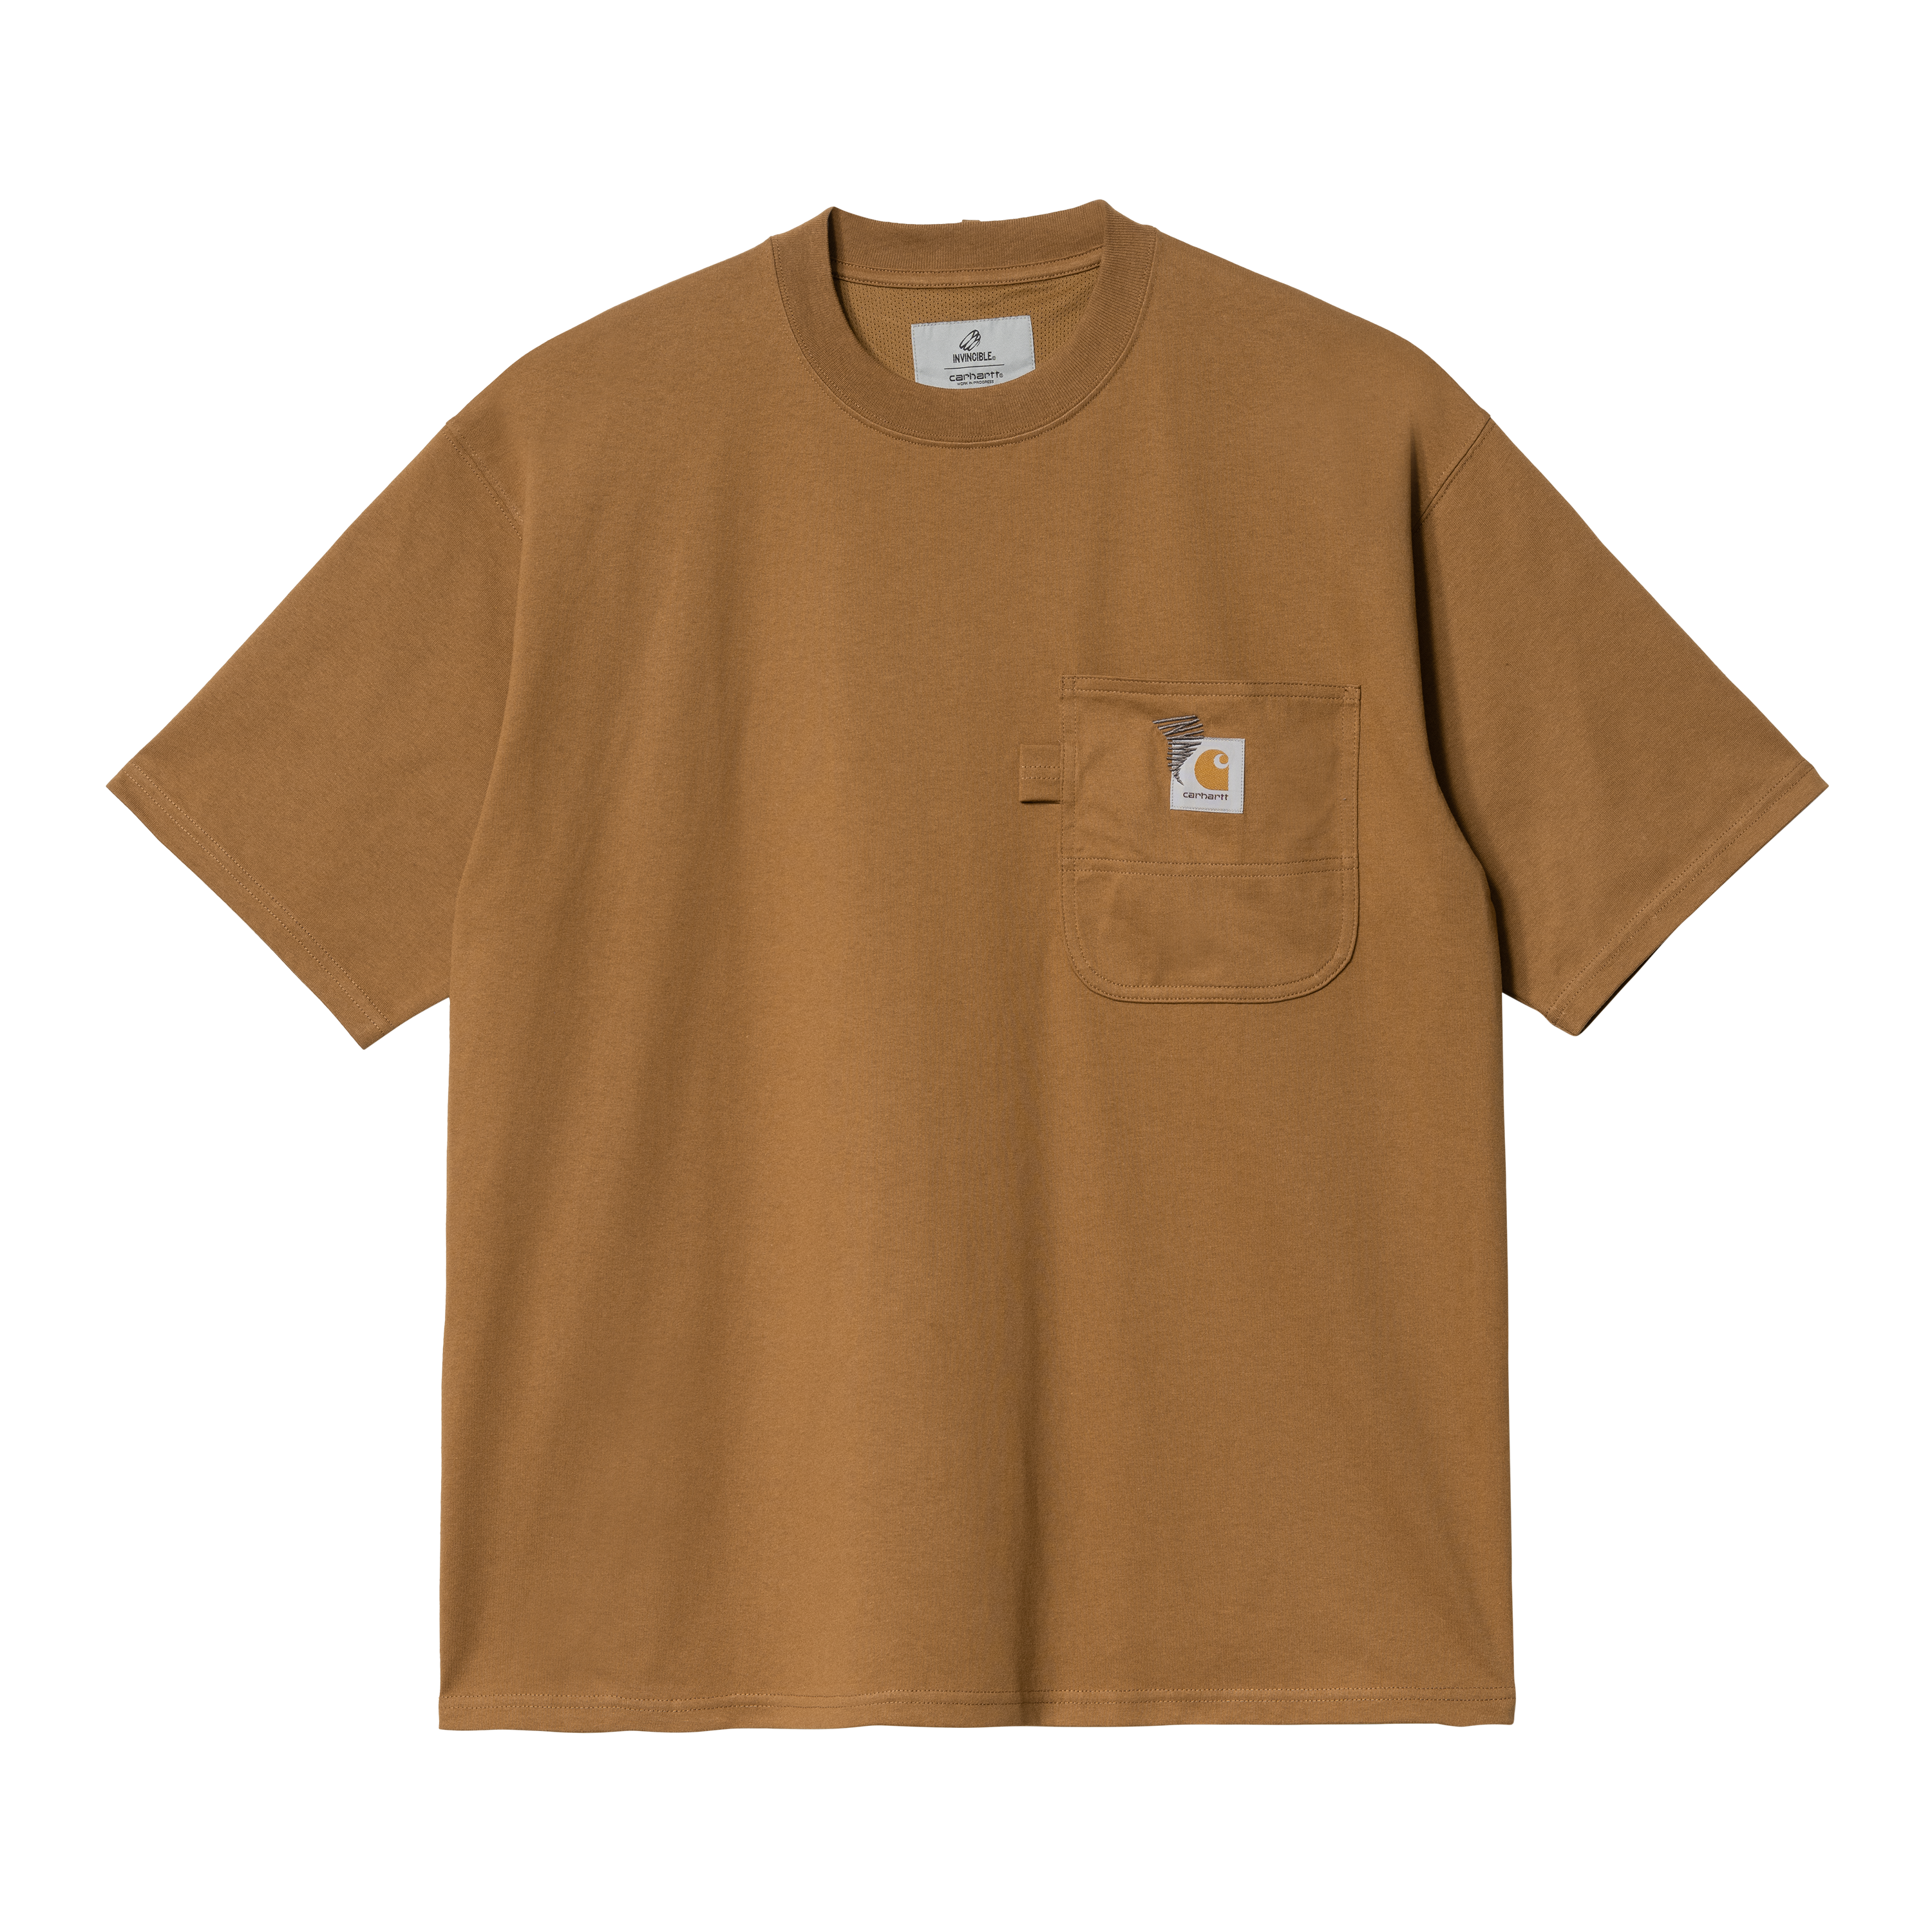 INVINCIBLE® x Carhartt WIP Now Available Online and In-store